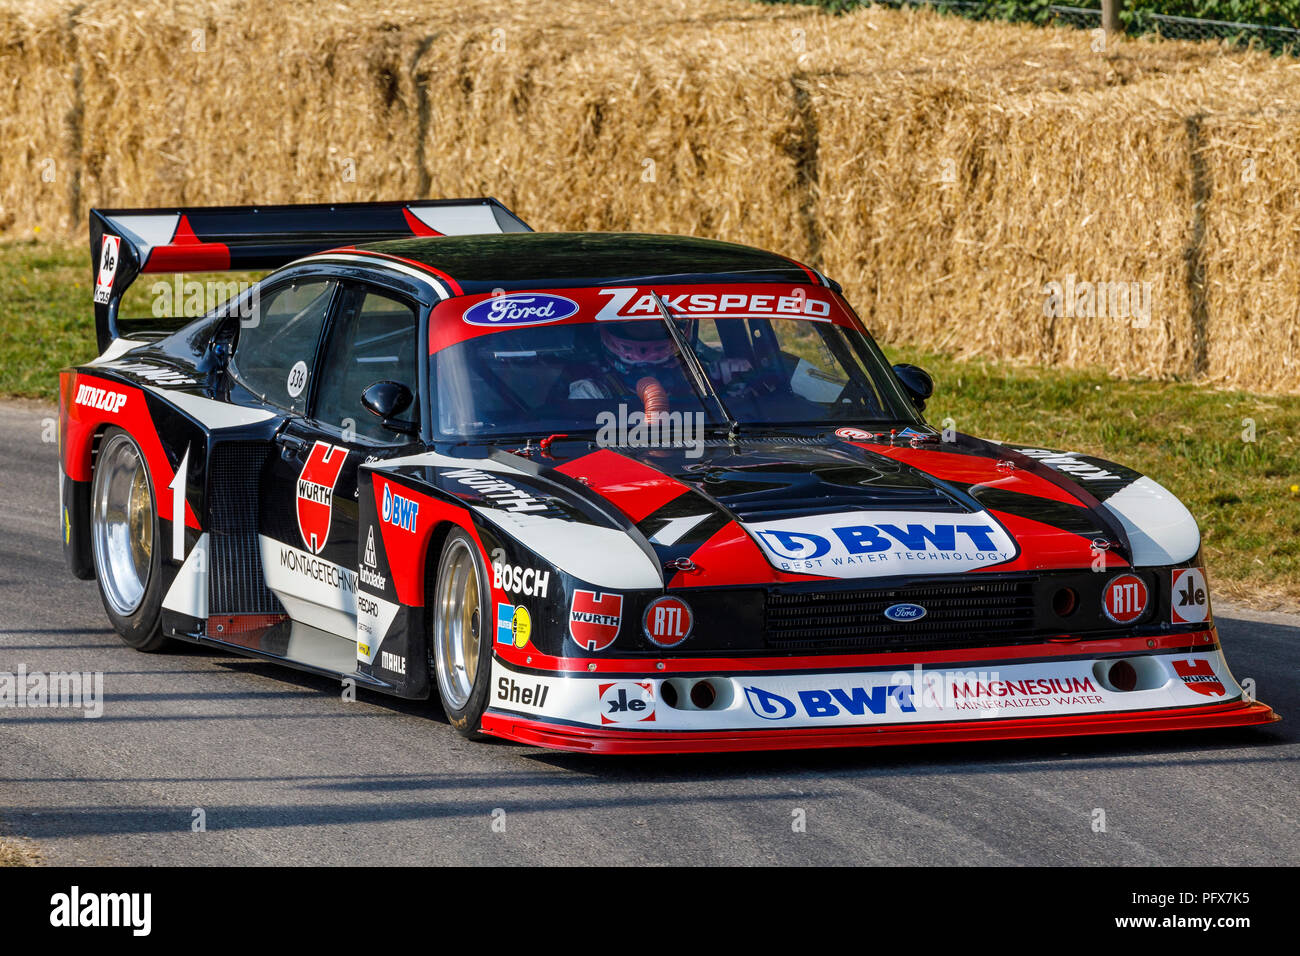 1980 Ford Zakspeed Capri DRM racer with driver Stefan Mucke at the 2018  Goodwood Festival of Speed, Sussex, UK Stock Photo - Alamy